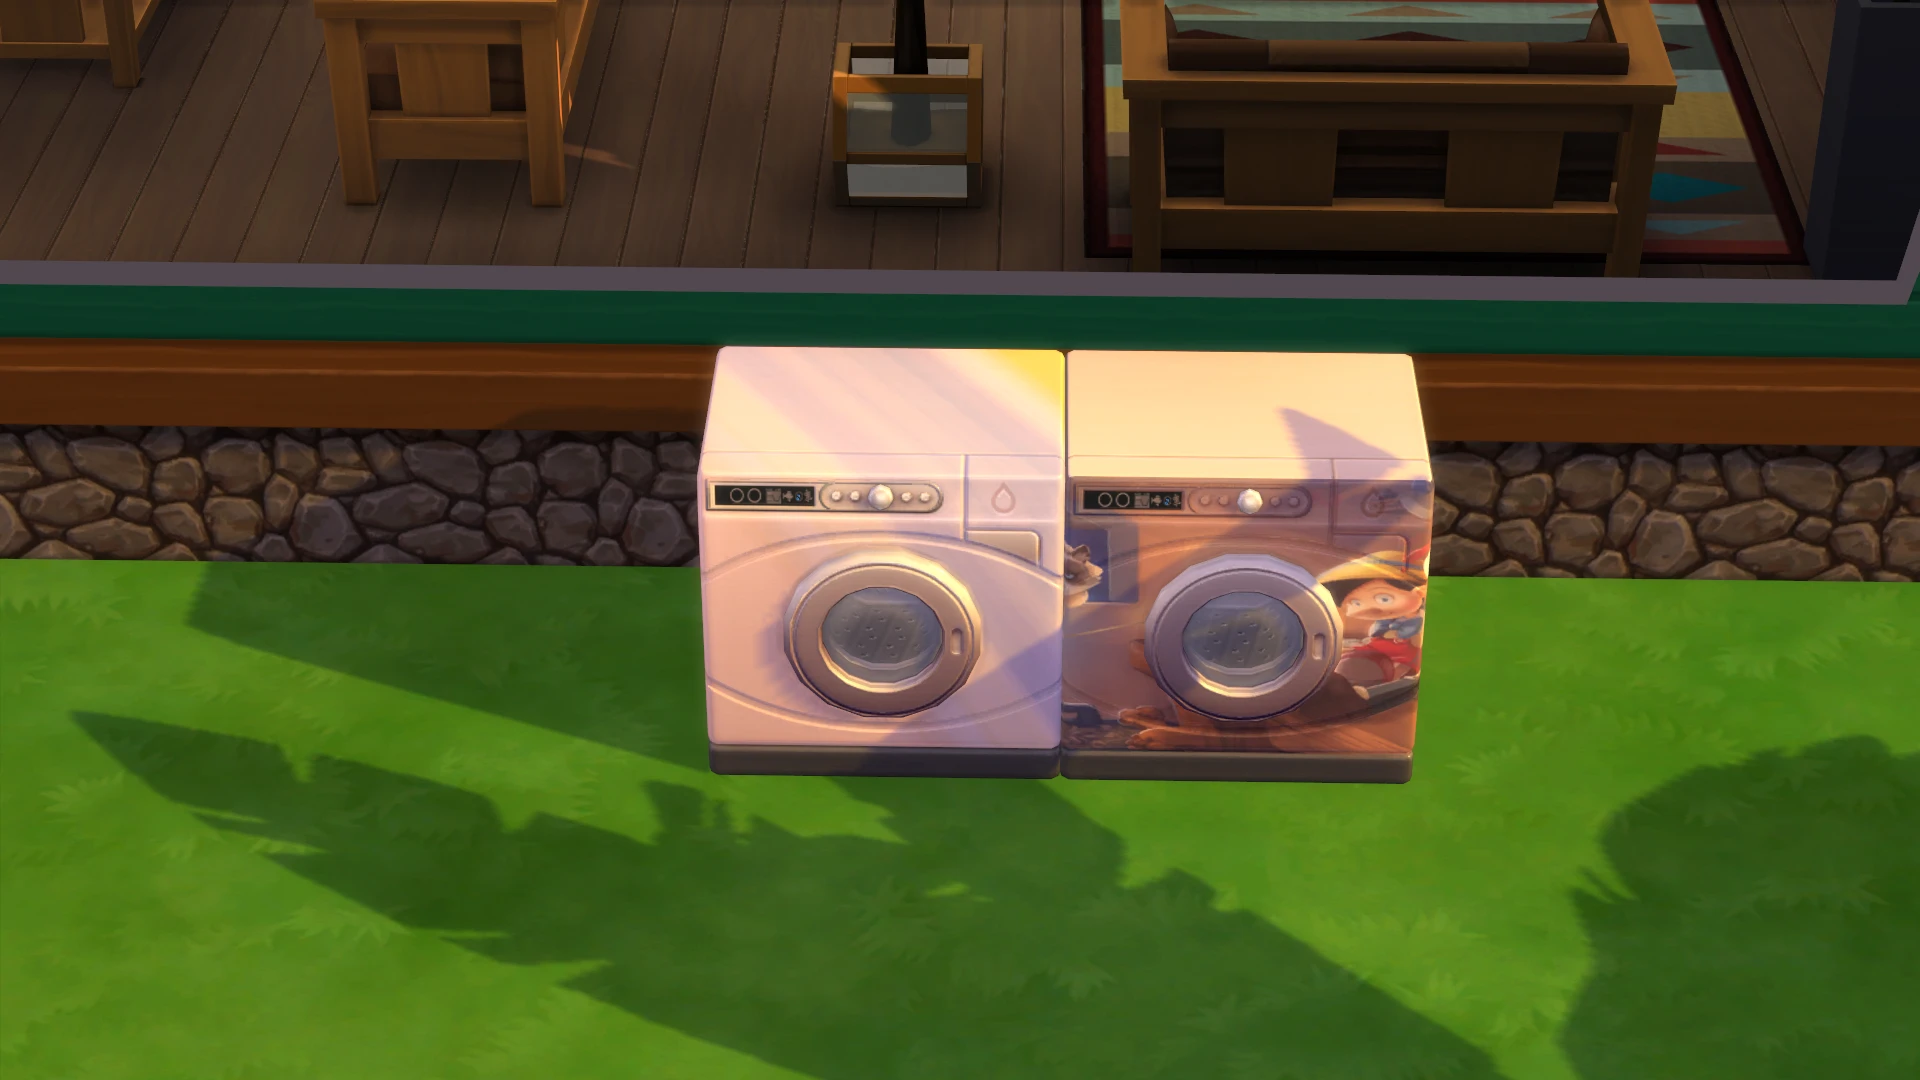 Washing -machines plus dryers at The Sims 4 Nexus - Mods and community